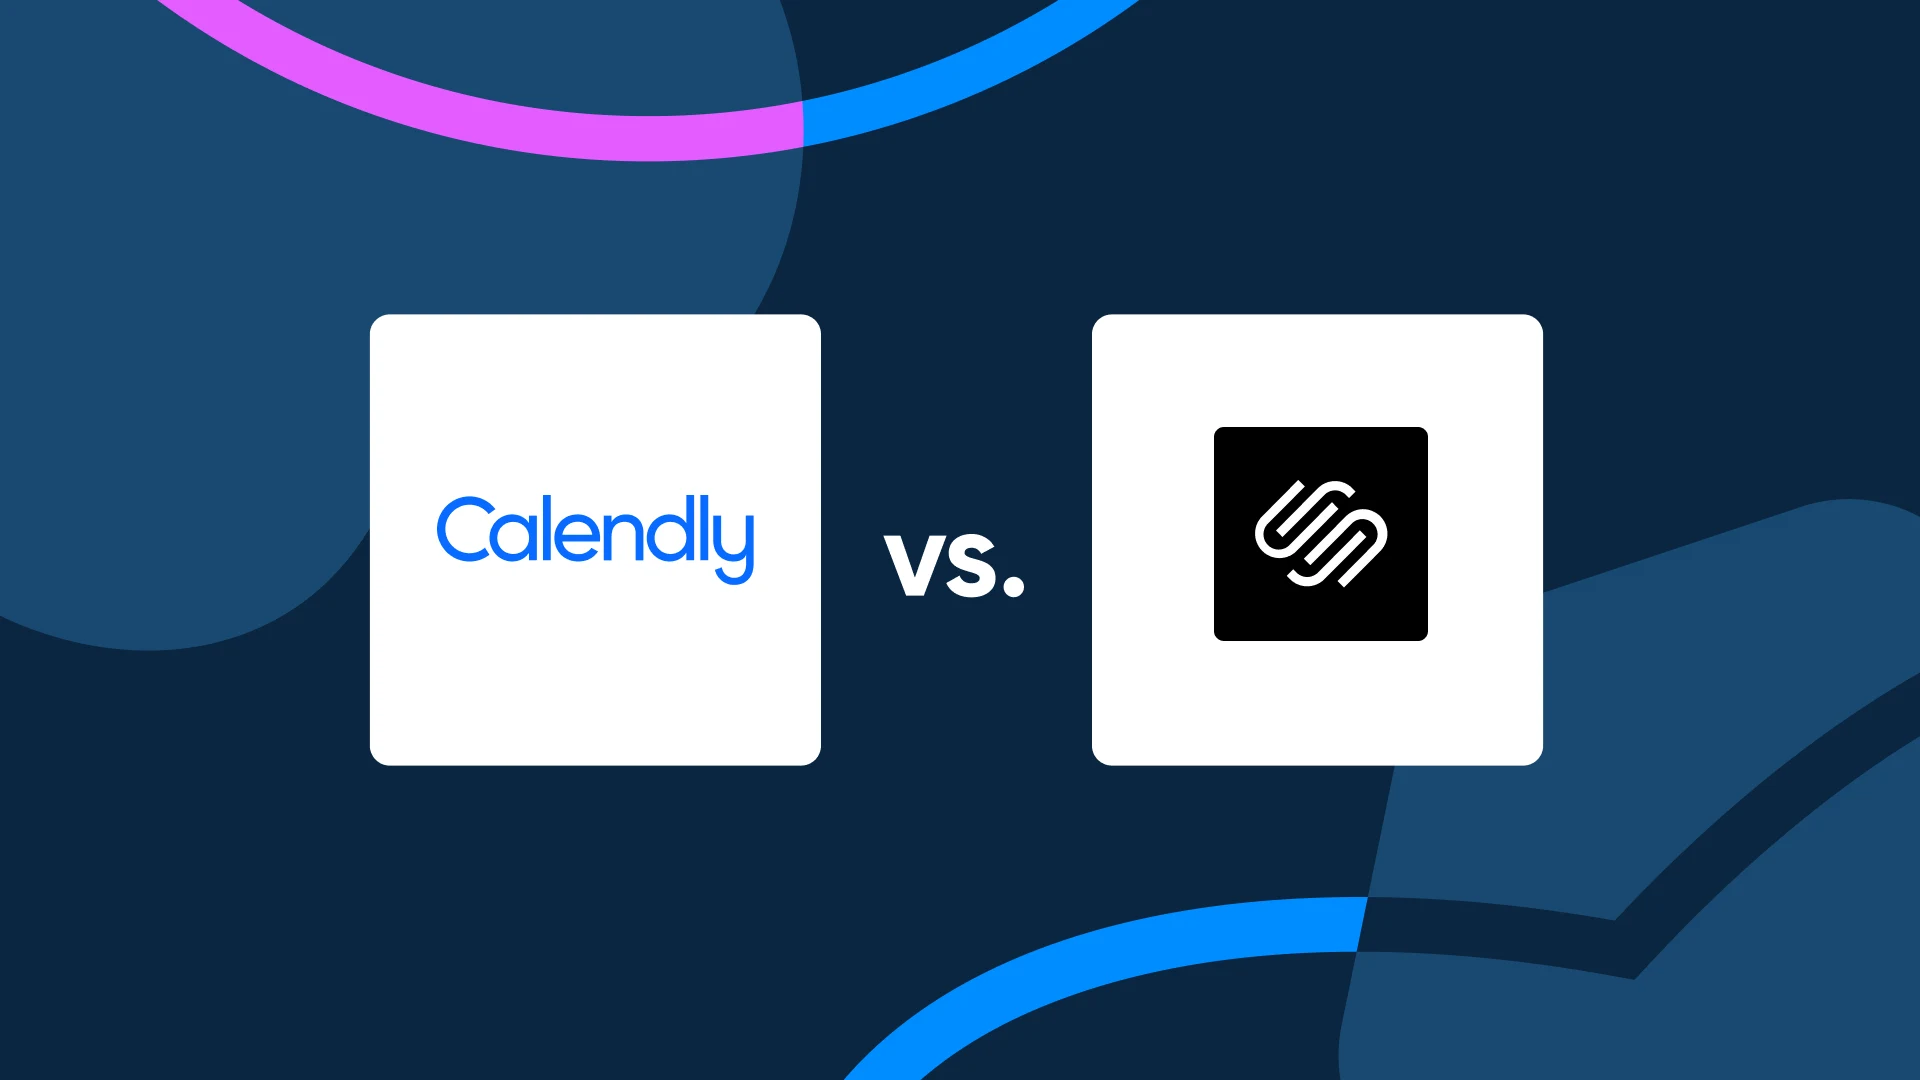 [Blog Hero] Calendly vs. Acuity: Which solution is better for you?